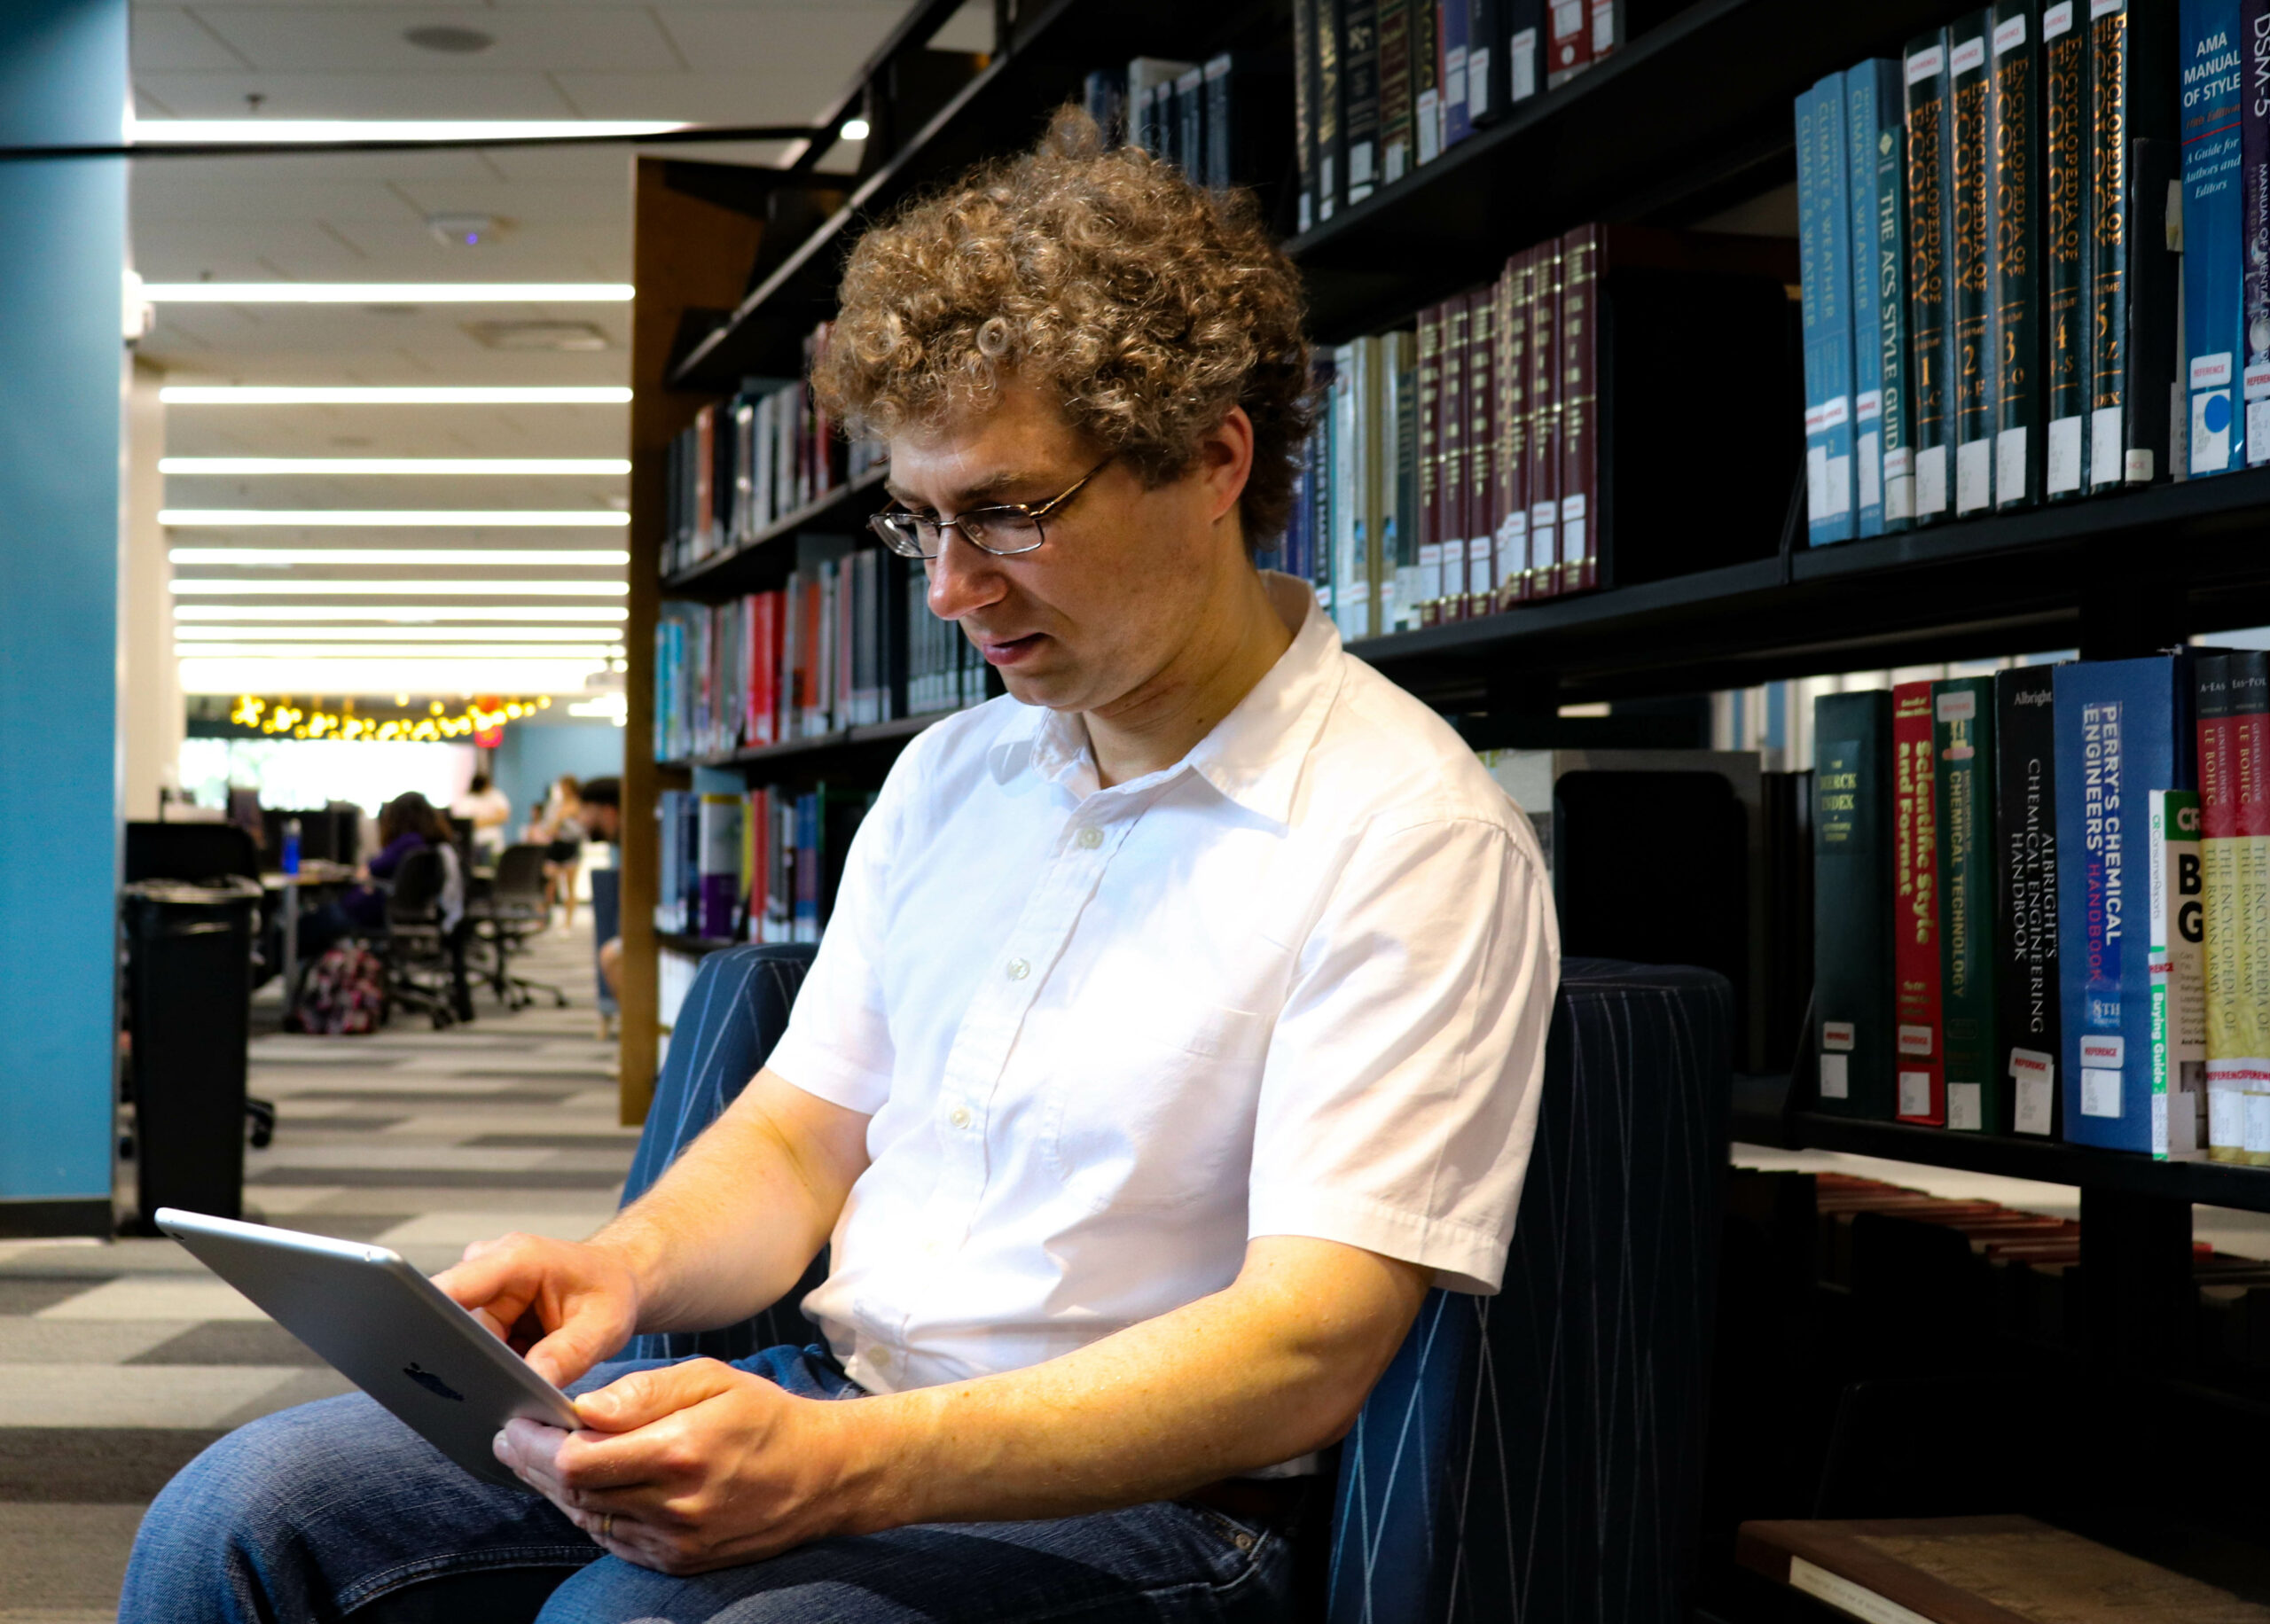 Pay us for library ebook loans, say authors, Libraries